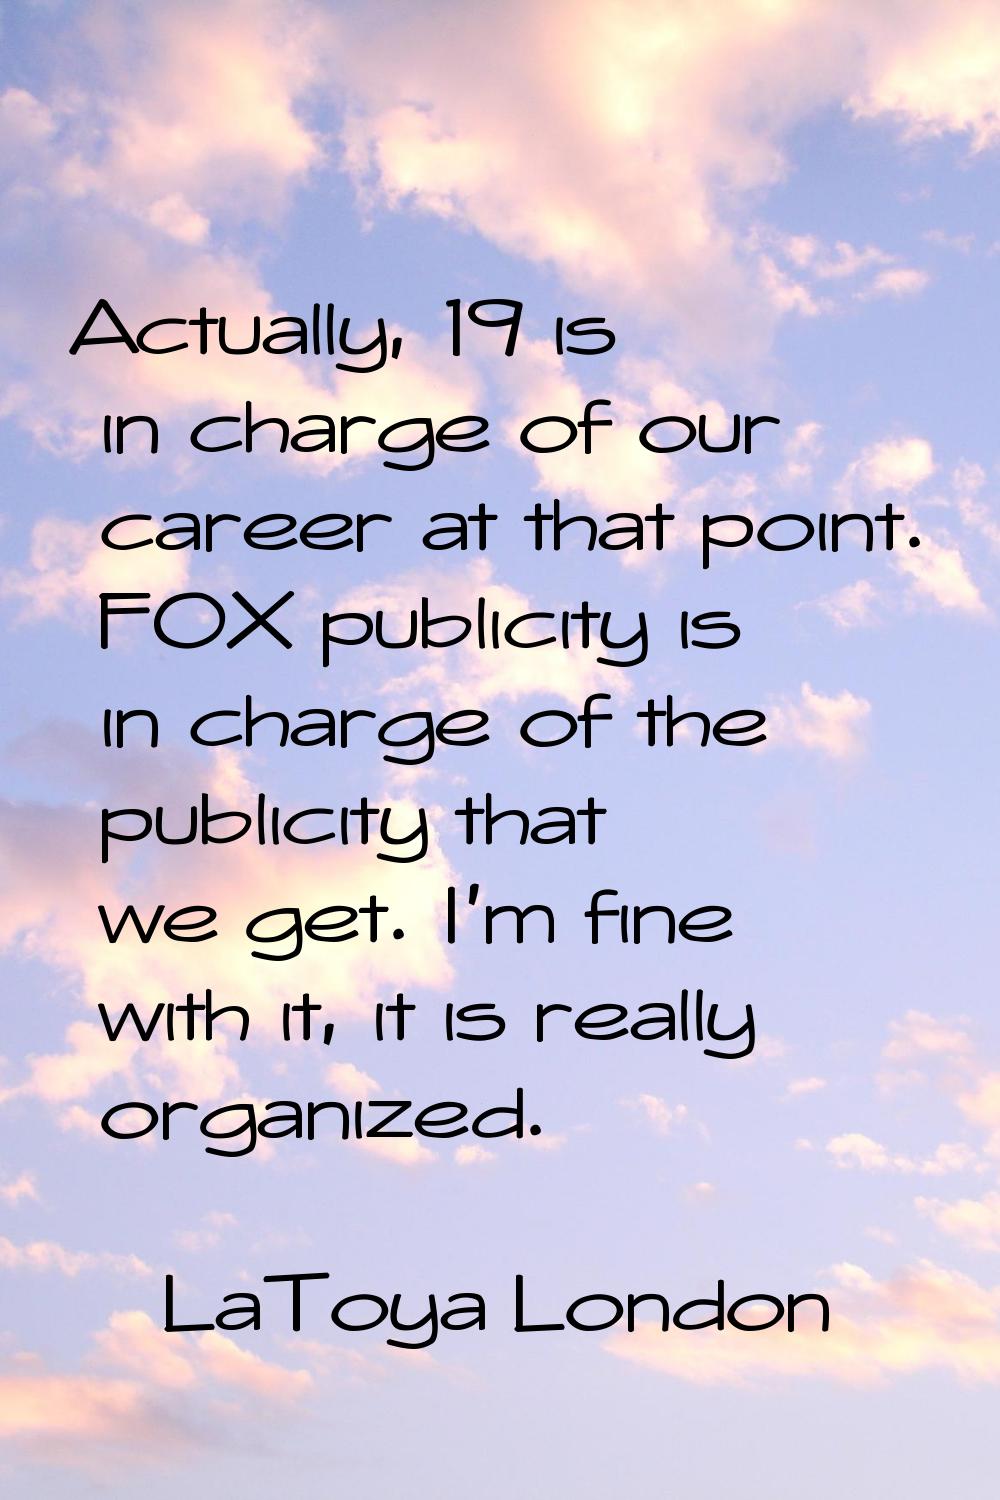 Actually, 19 is in charge of our career at that point. FOX publicity is in charge of the publicity 